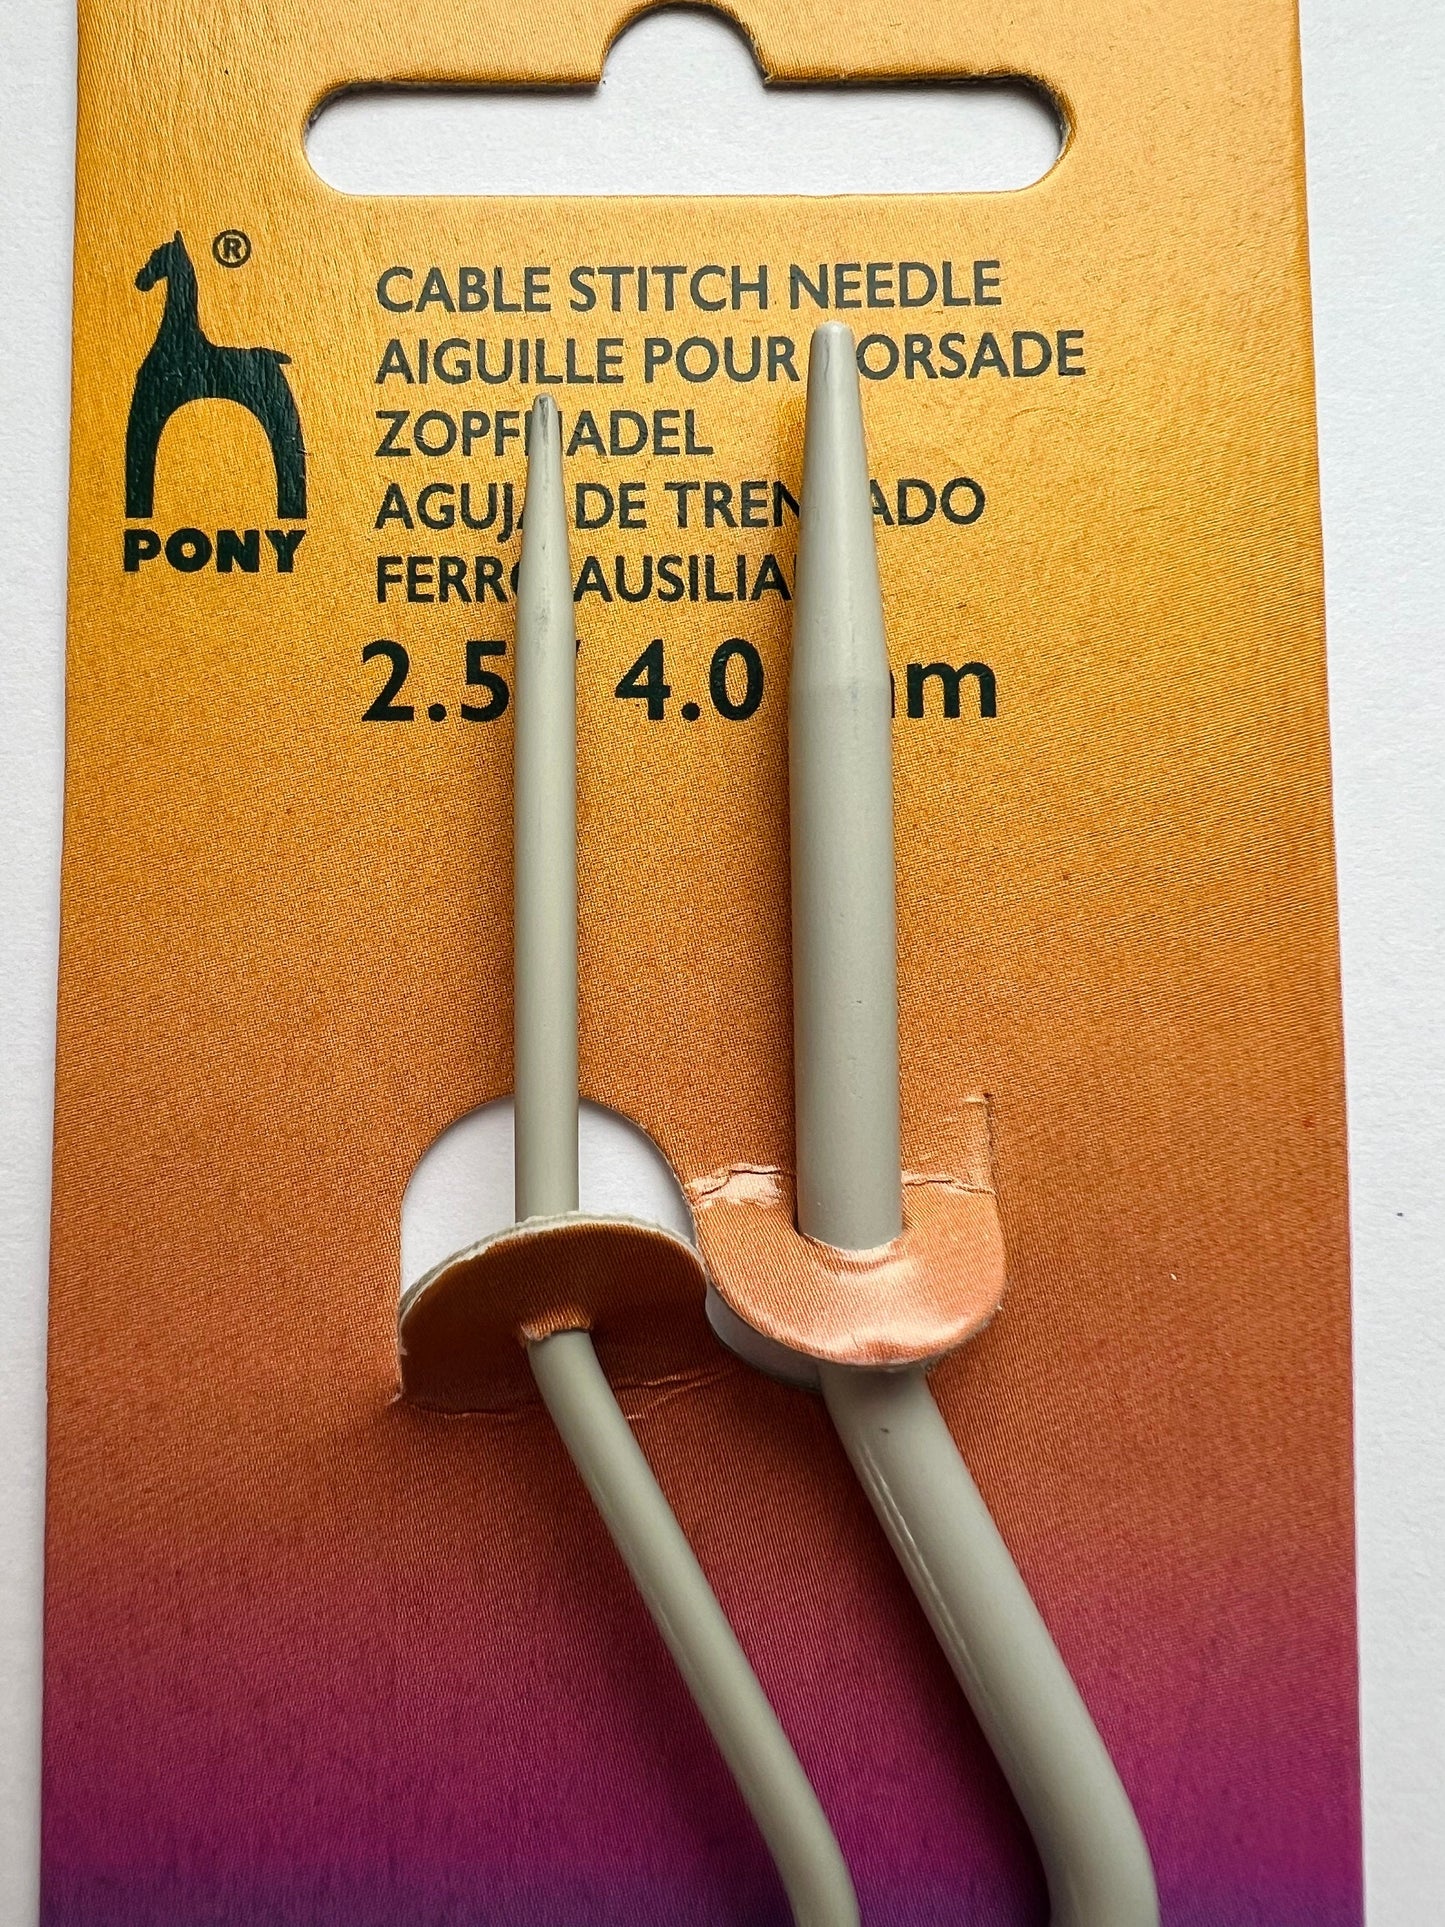 Pony Brand Knitting Cable Needles, Set of 2